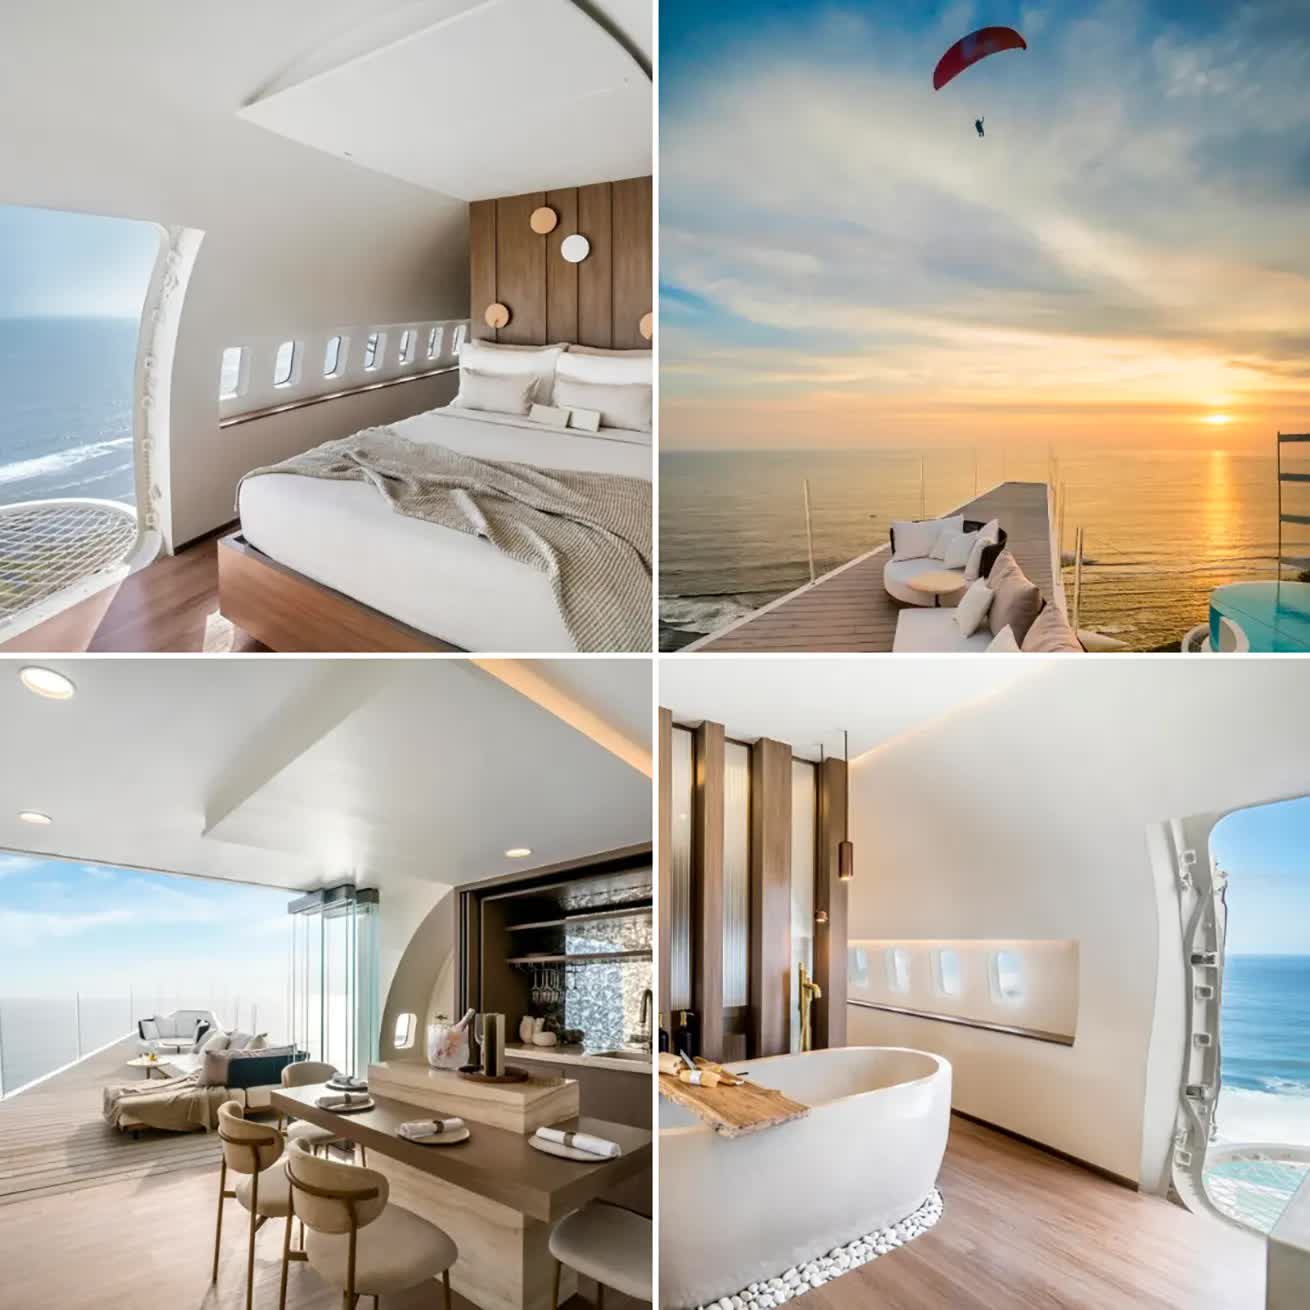 The interior of the Private Jet Villa hotel and its view of the ocean and a flying paraglider